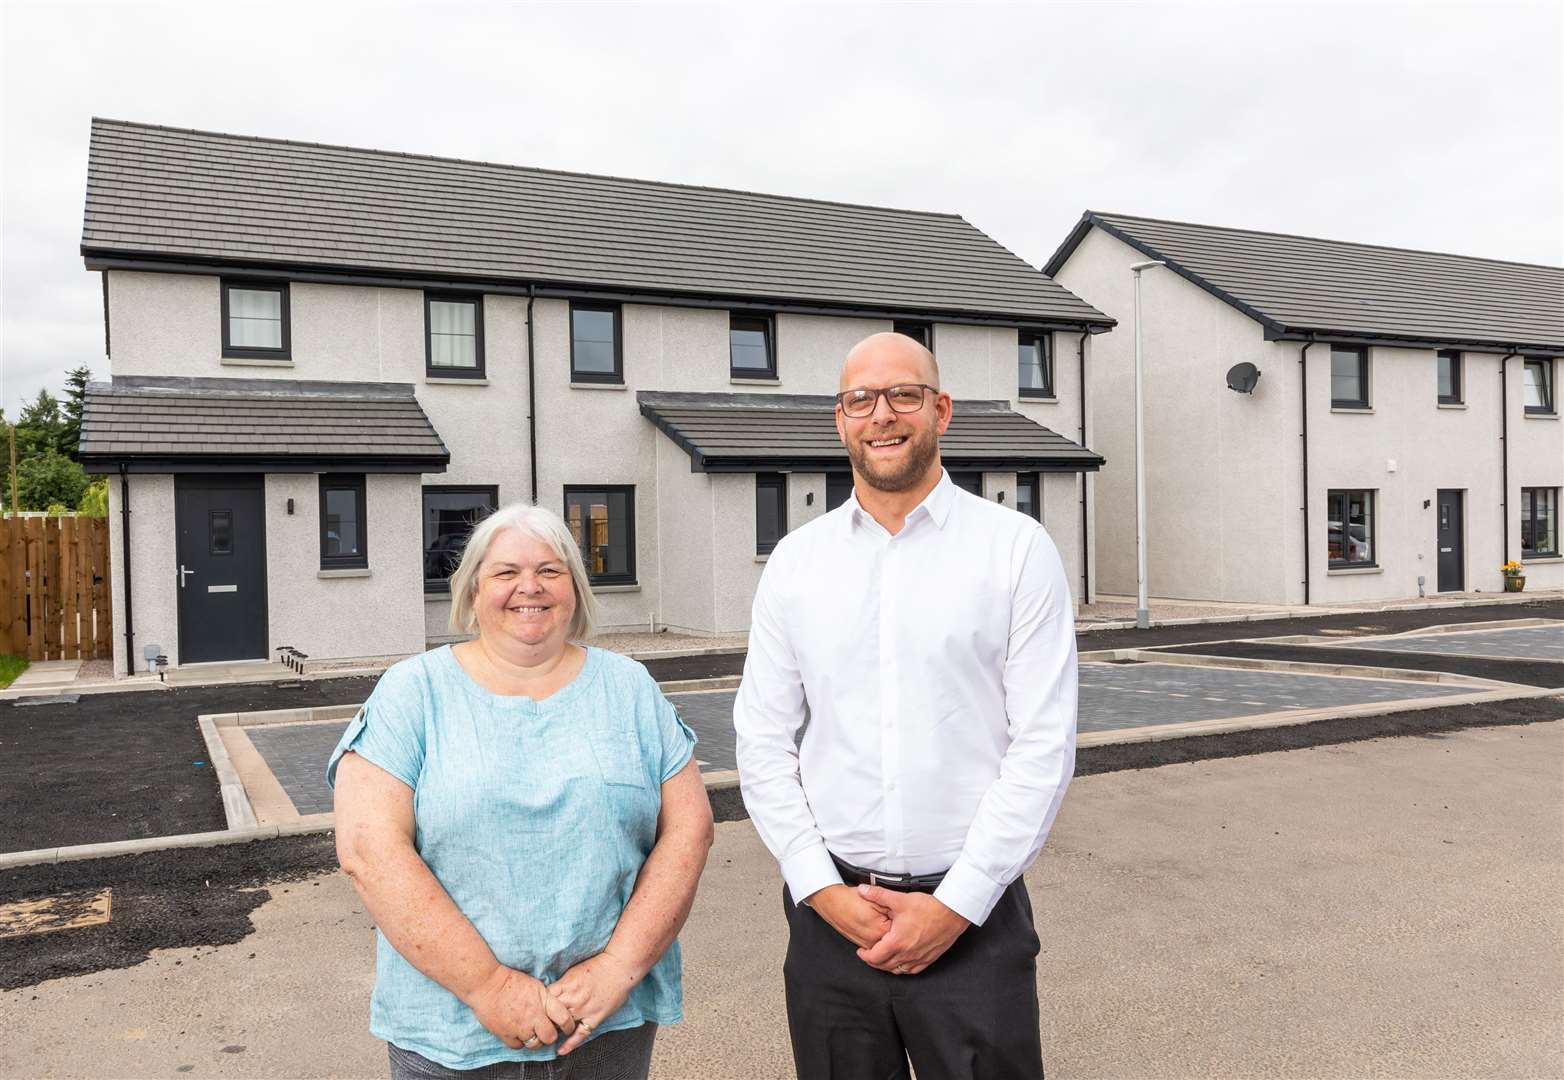 Osprey Housing’s housing director Dan Thompson and housing officer Elaine Sutherland welcomed the news at a new development in Aberdeenshire.